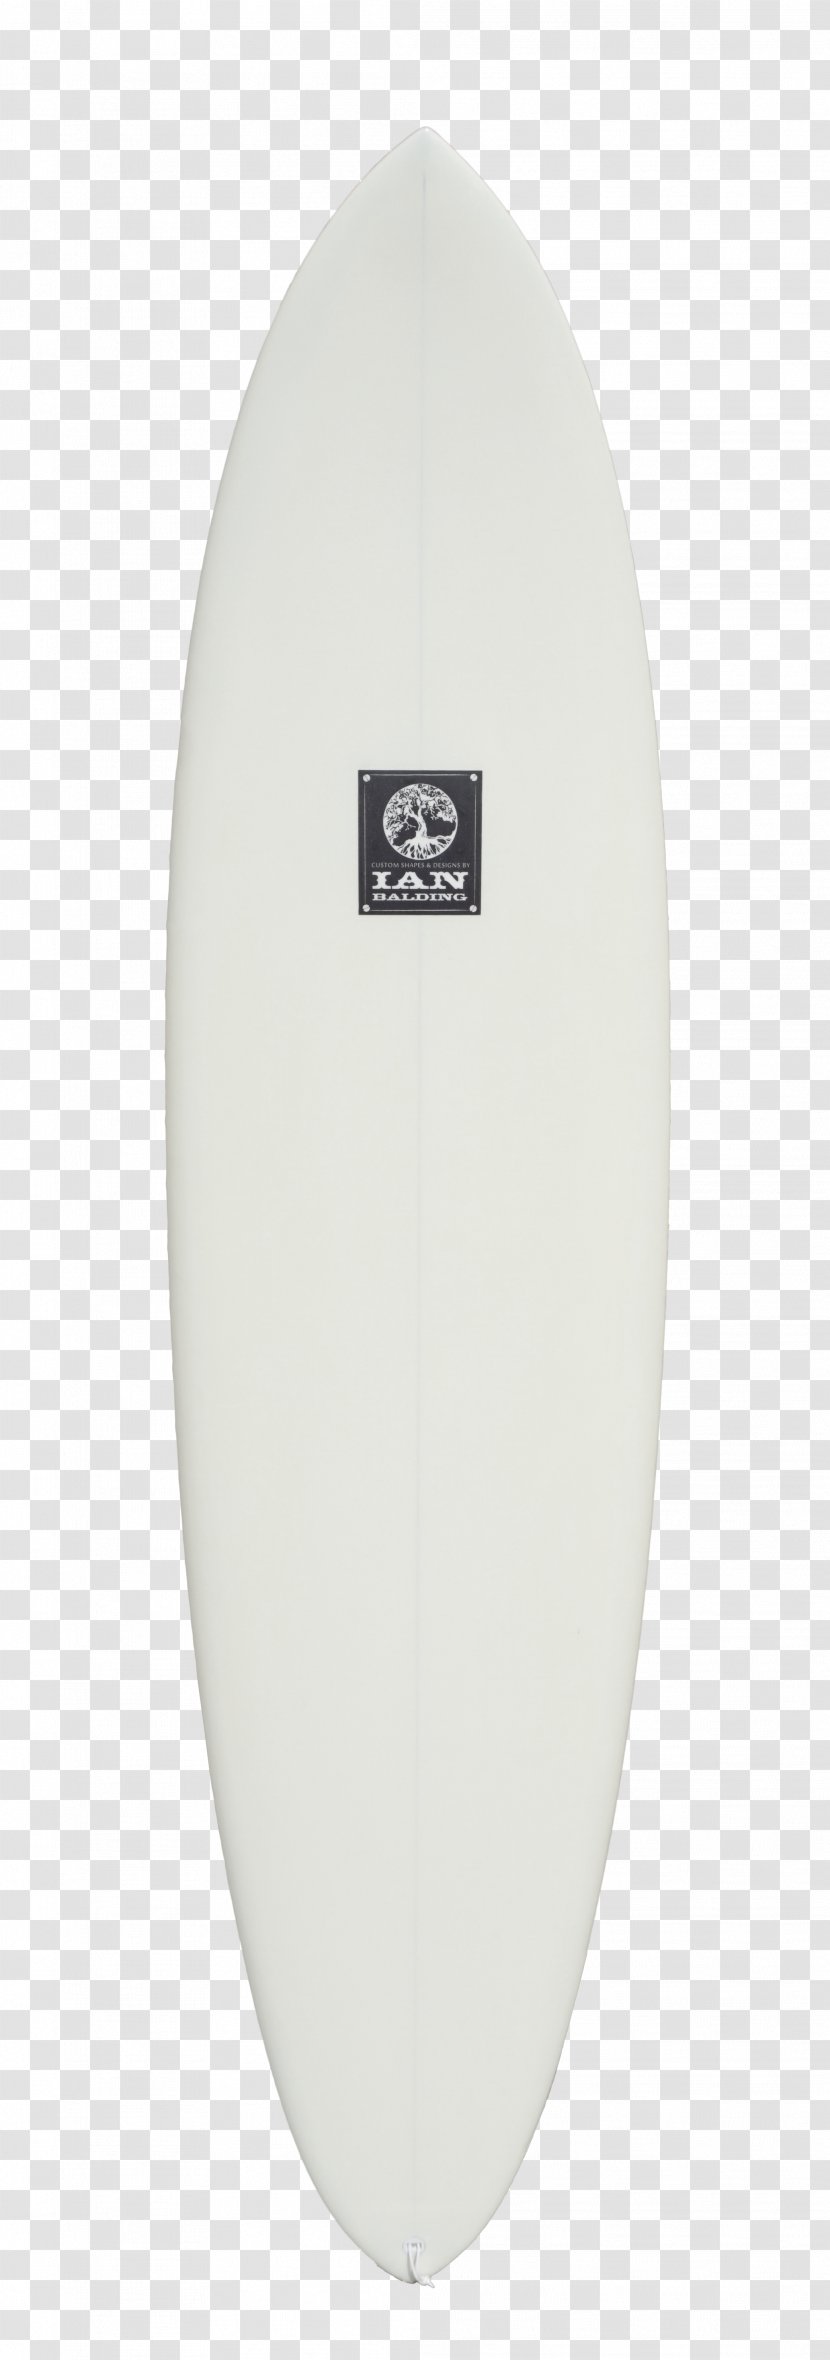 Surfboard Paddleboarding Wood Product Design - Material - White Transparent PNG